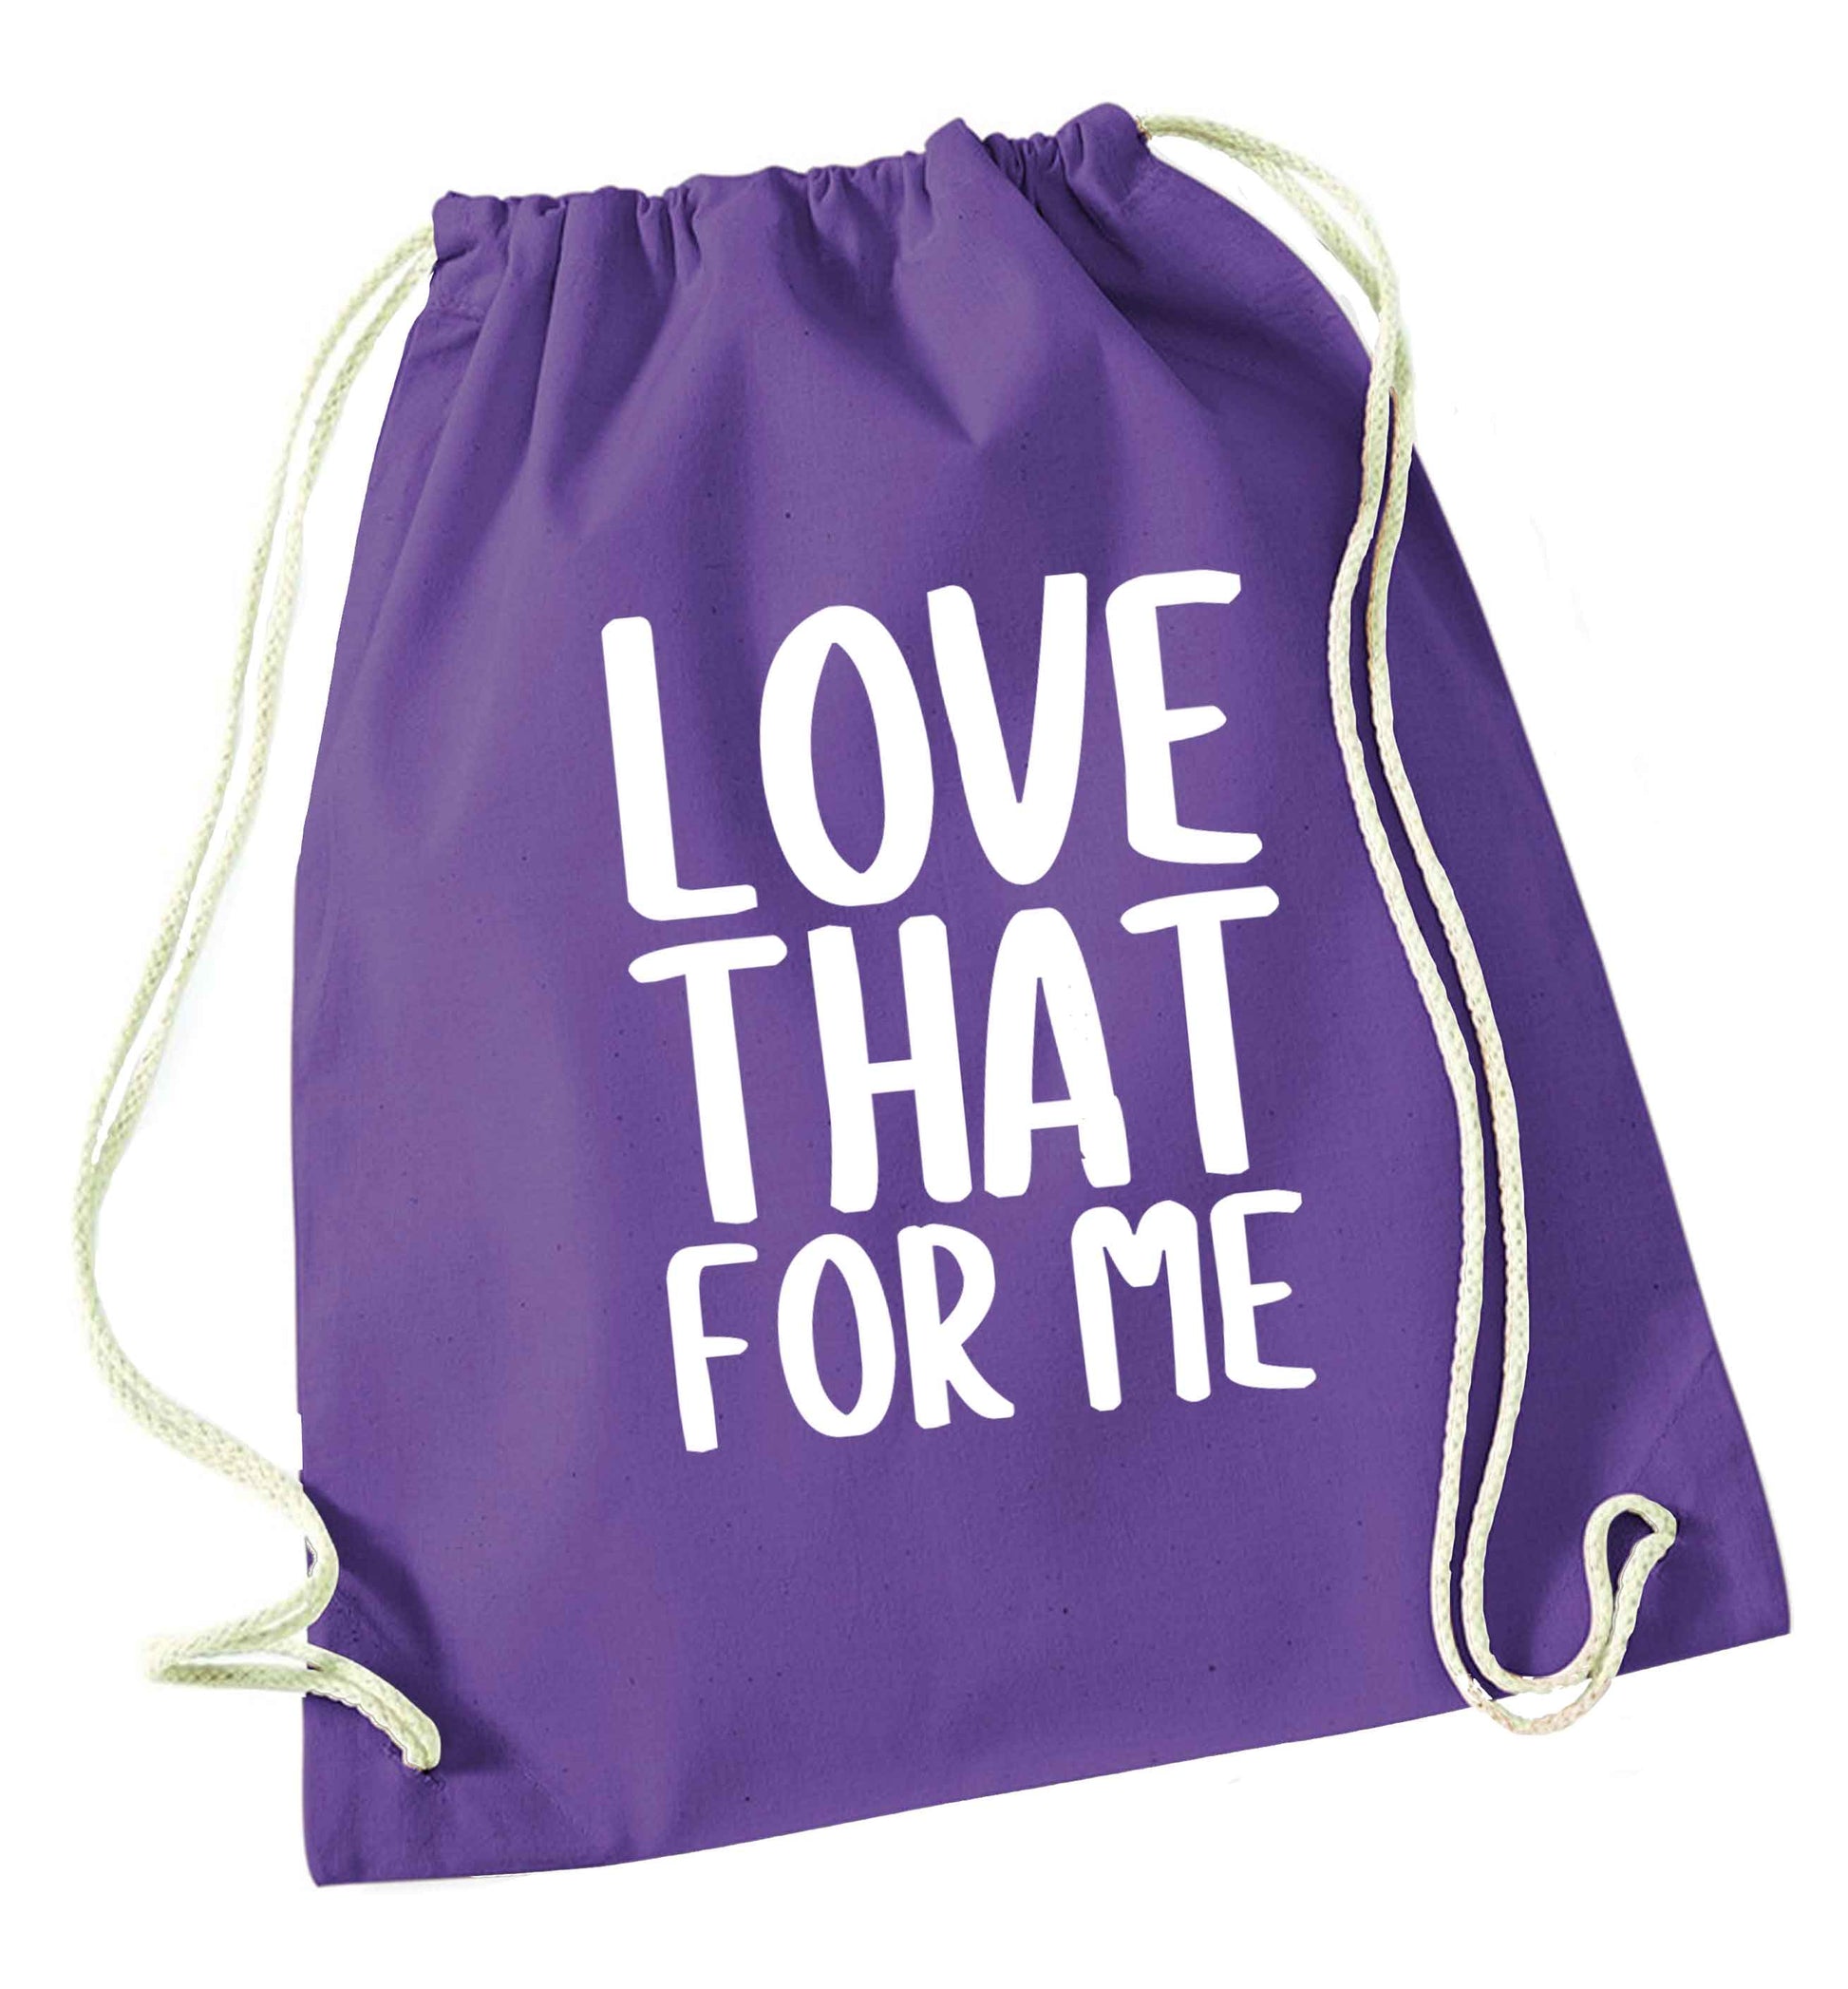 We love this for YOU! Who else loves saying this?!  purple drawstring bag